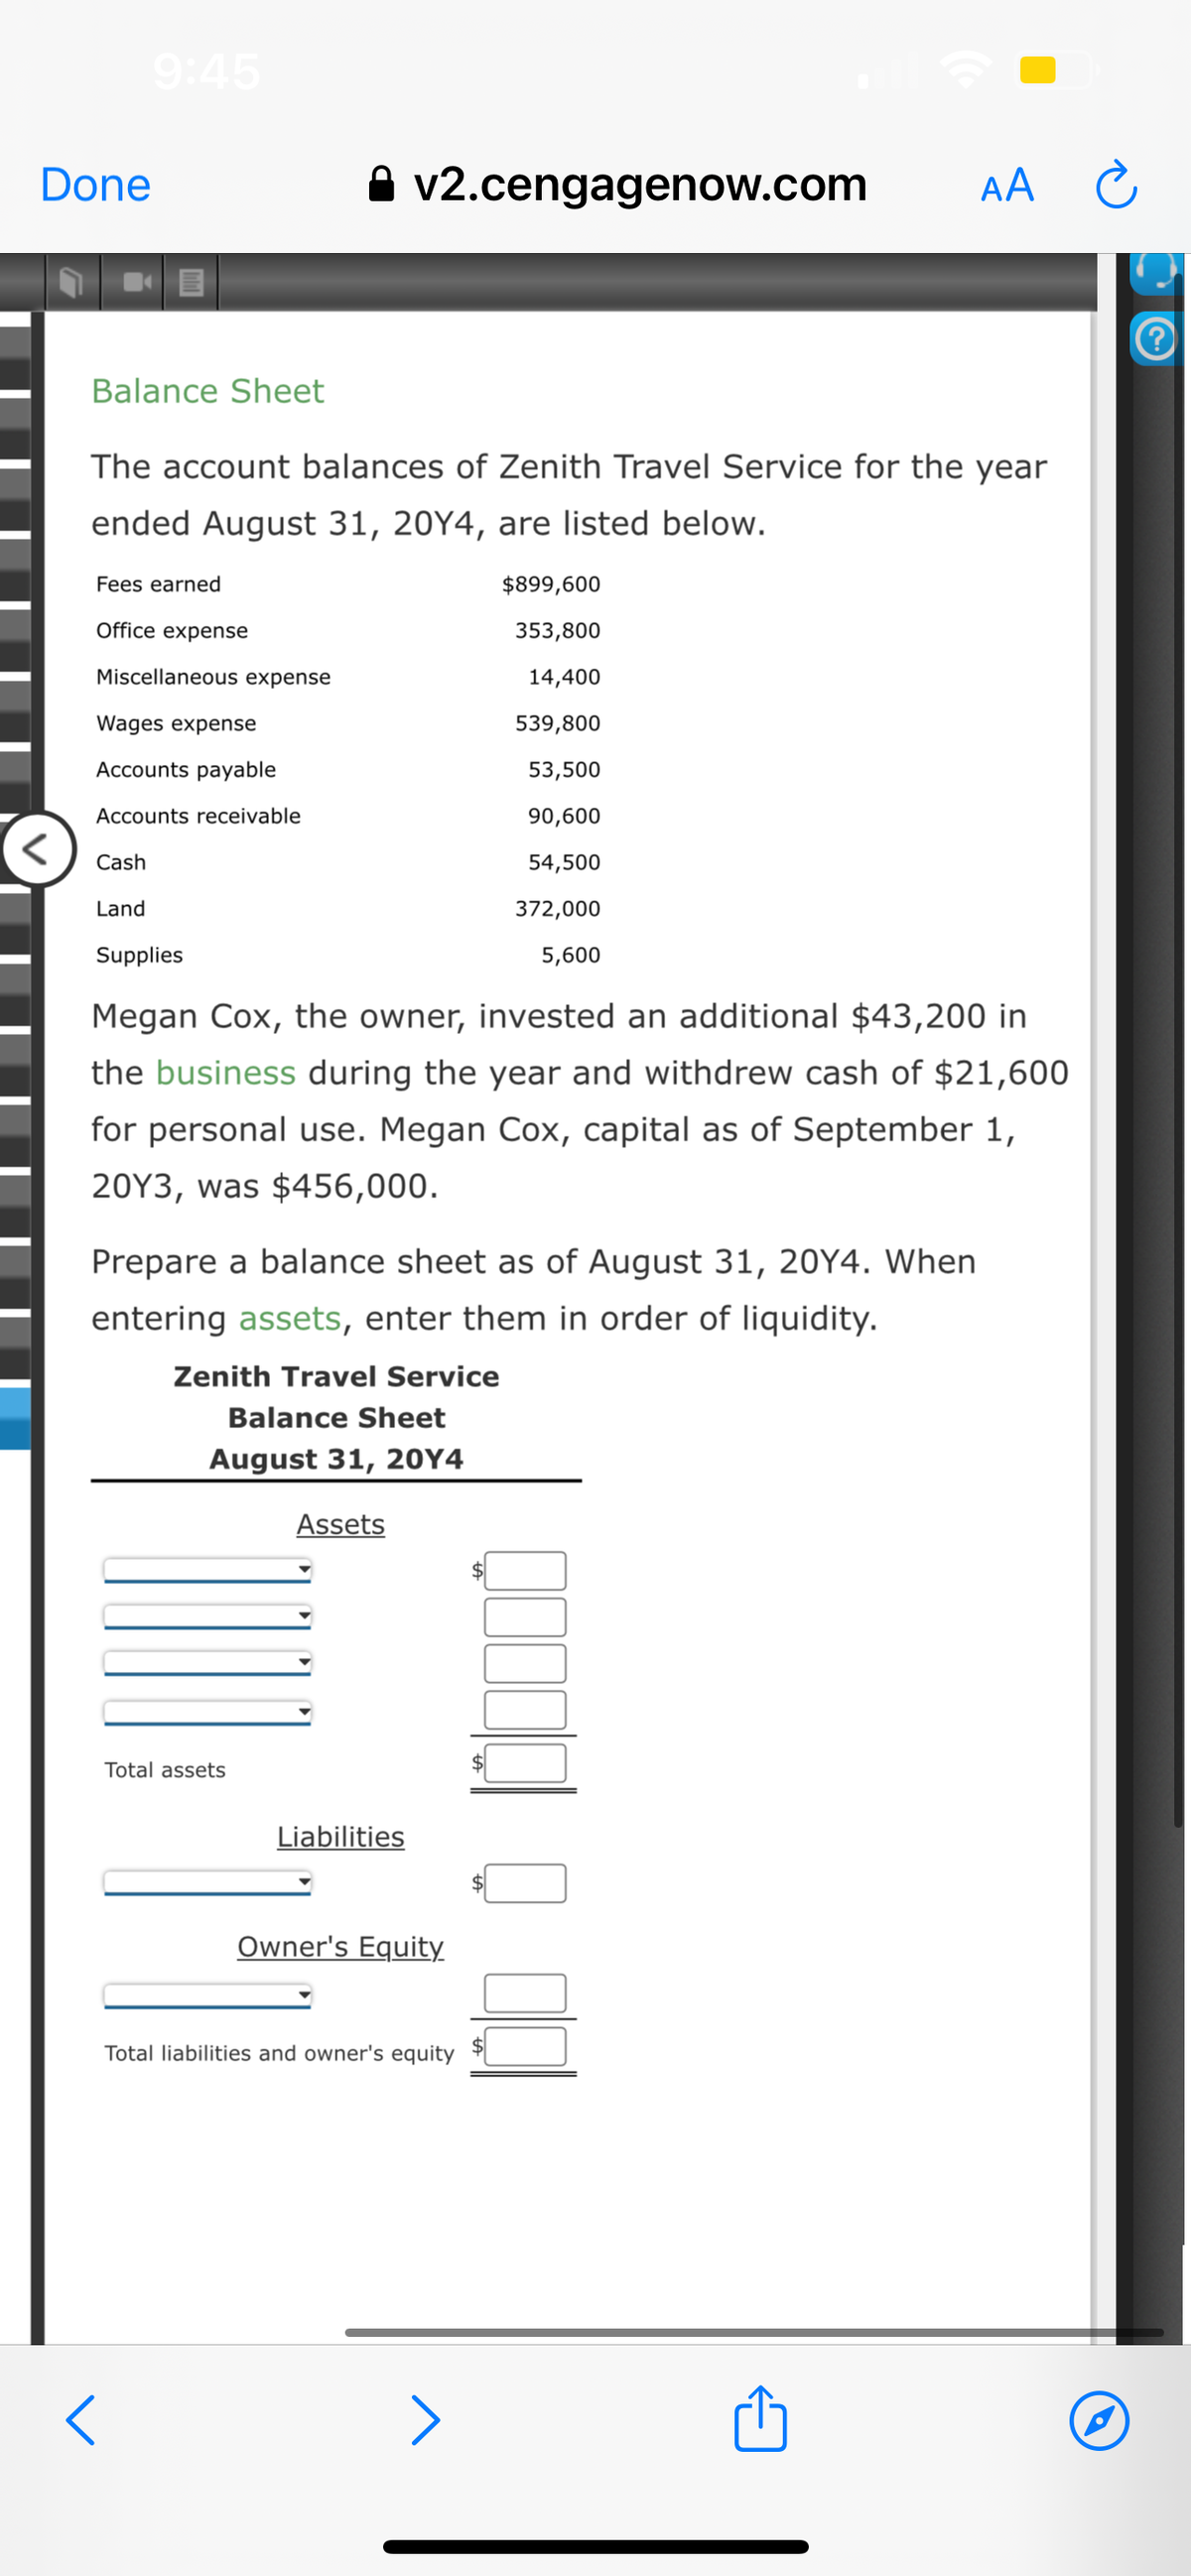 Done
Balance Sheet
The account balances of Zenith Travel Service for the year
ended August 31, 20Y4, are listed below.
Fees earned
Office expense
Miscellaneous expense
<
Wages expense
Accounts payable
Accounts receivable
Cash
Land
A v2.cengagenow.com
Supplies
Megan Cox, the owner, invested an additional $43,200 in
the business during the year and withdrew cash of $21,600
for personal use. Megan Cox, capital as of September 1,
20Y3, was $456,000.
Prepare a balance sheet as of August 31, 20Y4. When
entering assets, enter them in order of liquidity.
Zenith Travel Service
Balance Sheet
August 31, 20Y4
Total assets
Assets
Liabilities
$899,600
353,800
14,400
539,800
53,500
90,600
54,500
372,000
5,600
Owner's Equity
Total liabilities and owner's equity
AA C
m
P